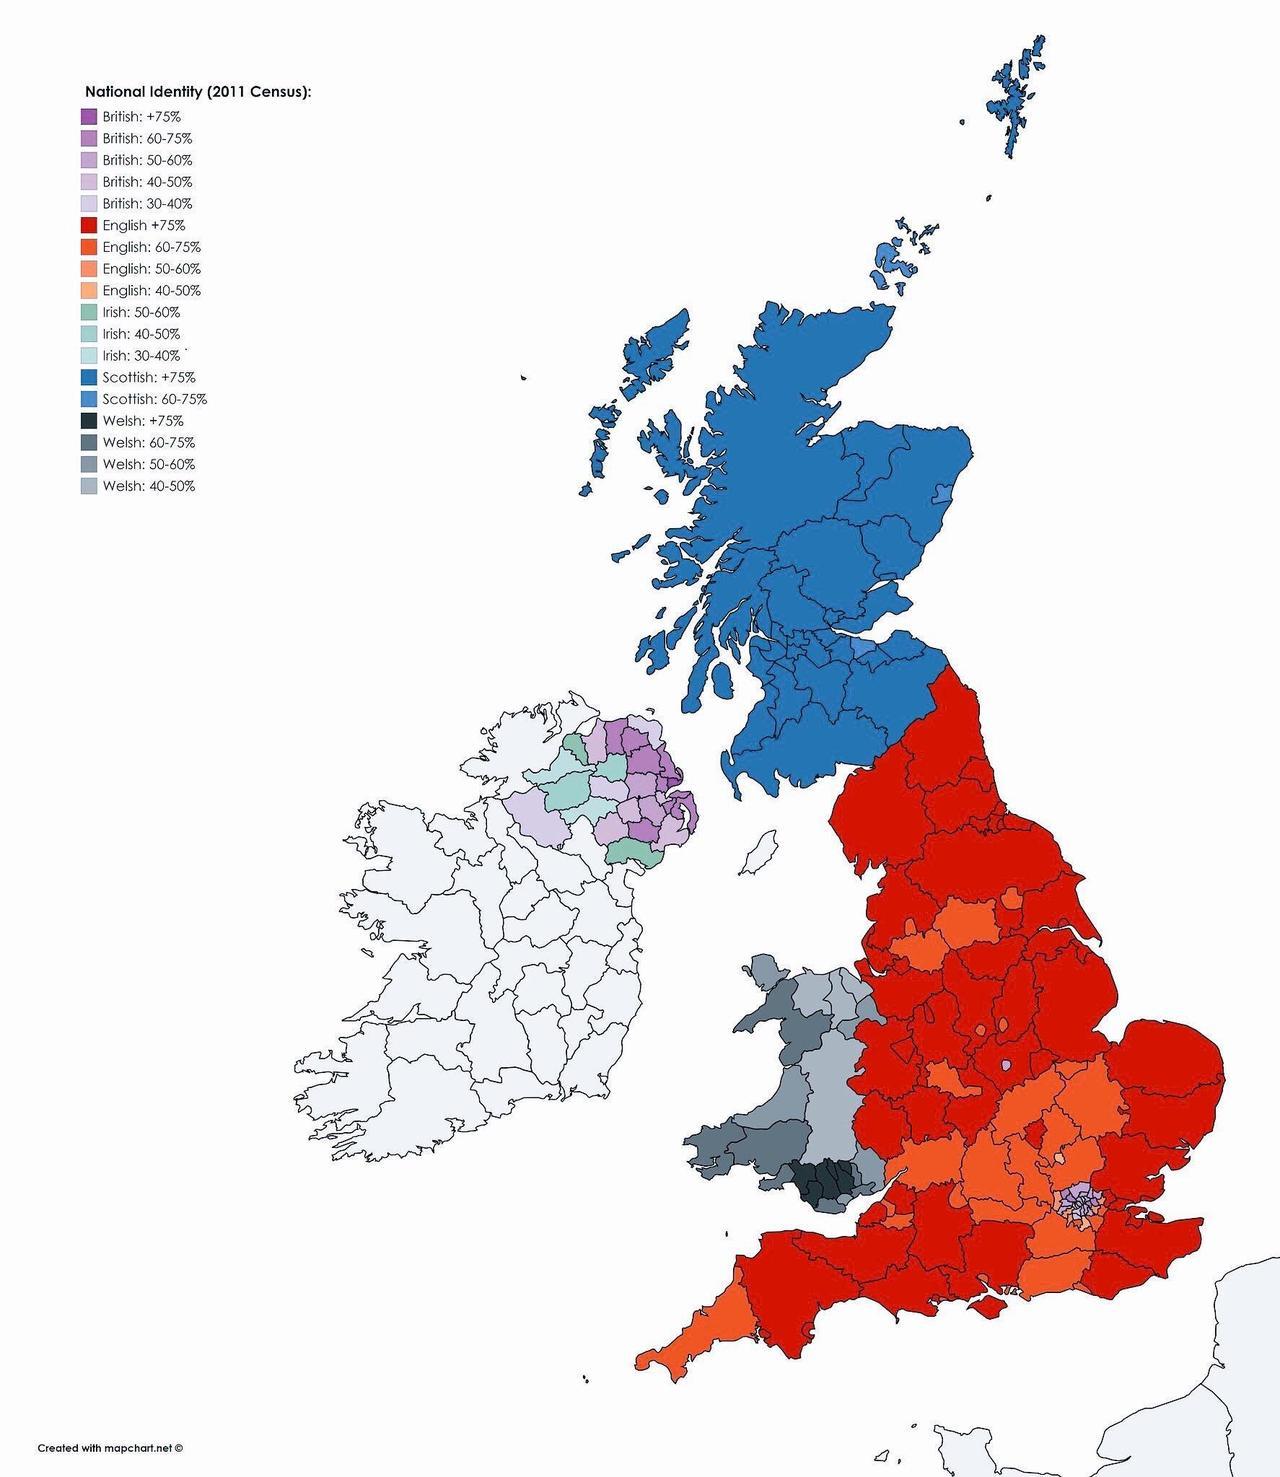 National identity in the UK according to the 2011 census.